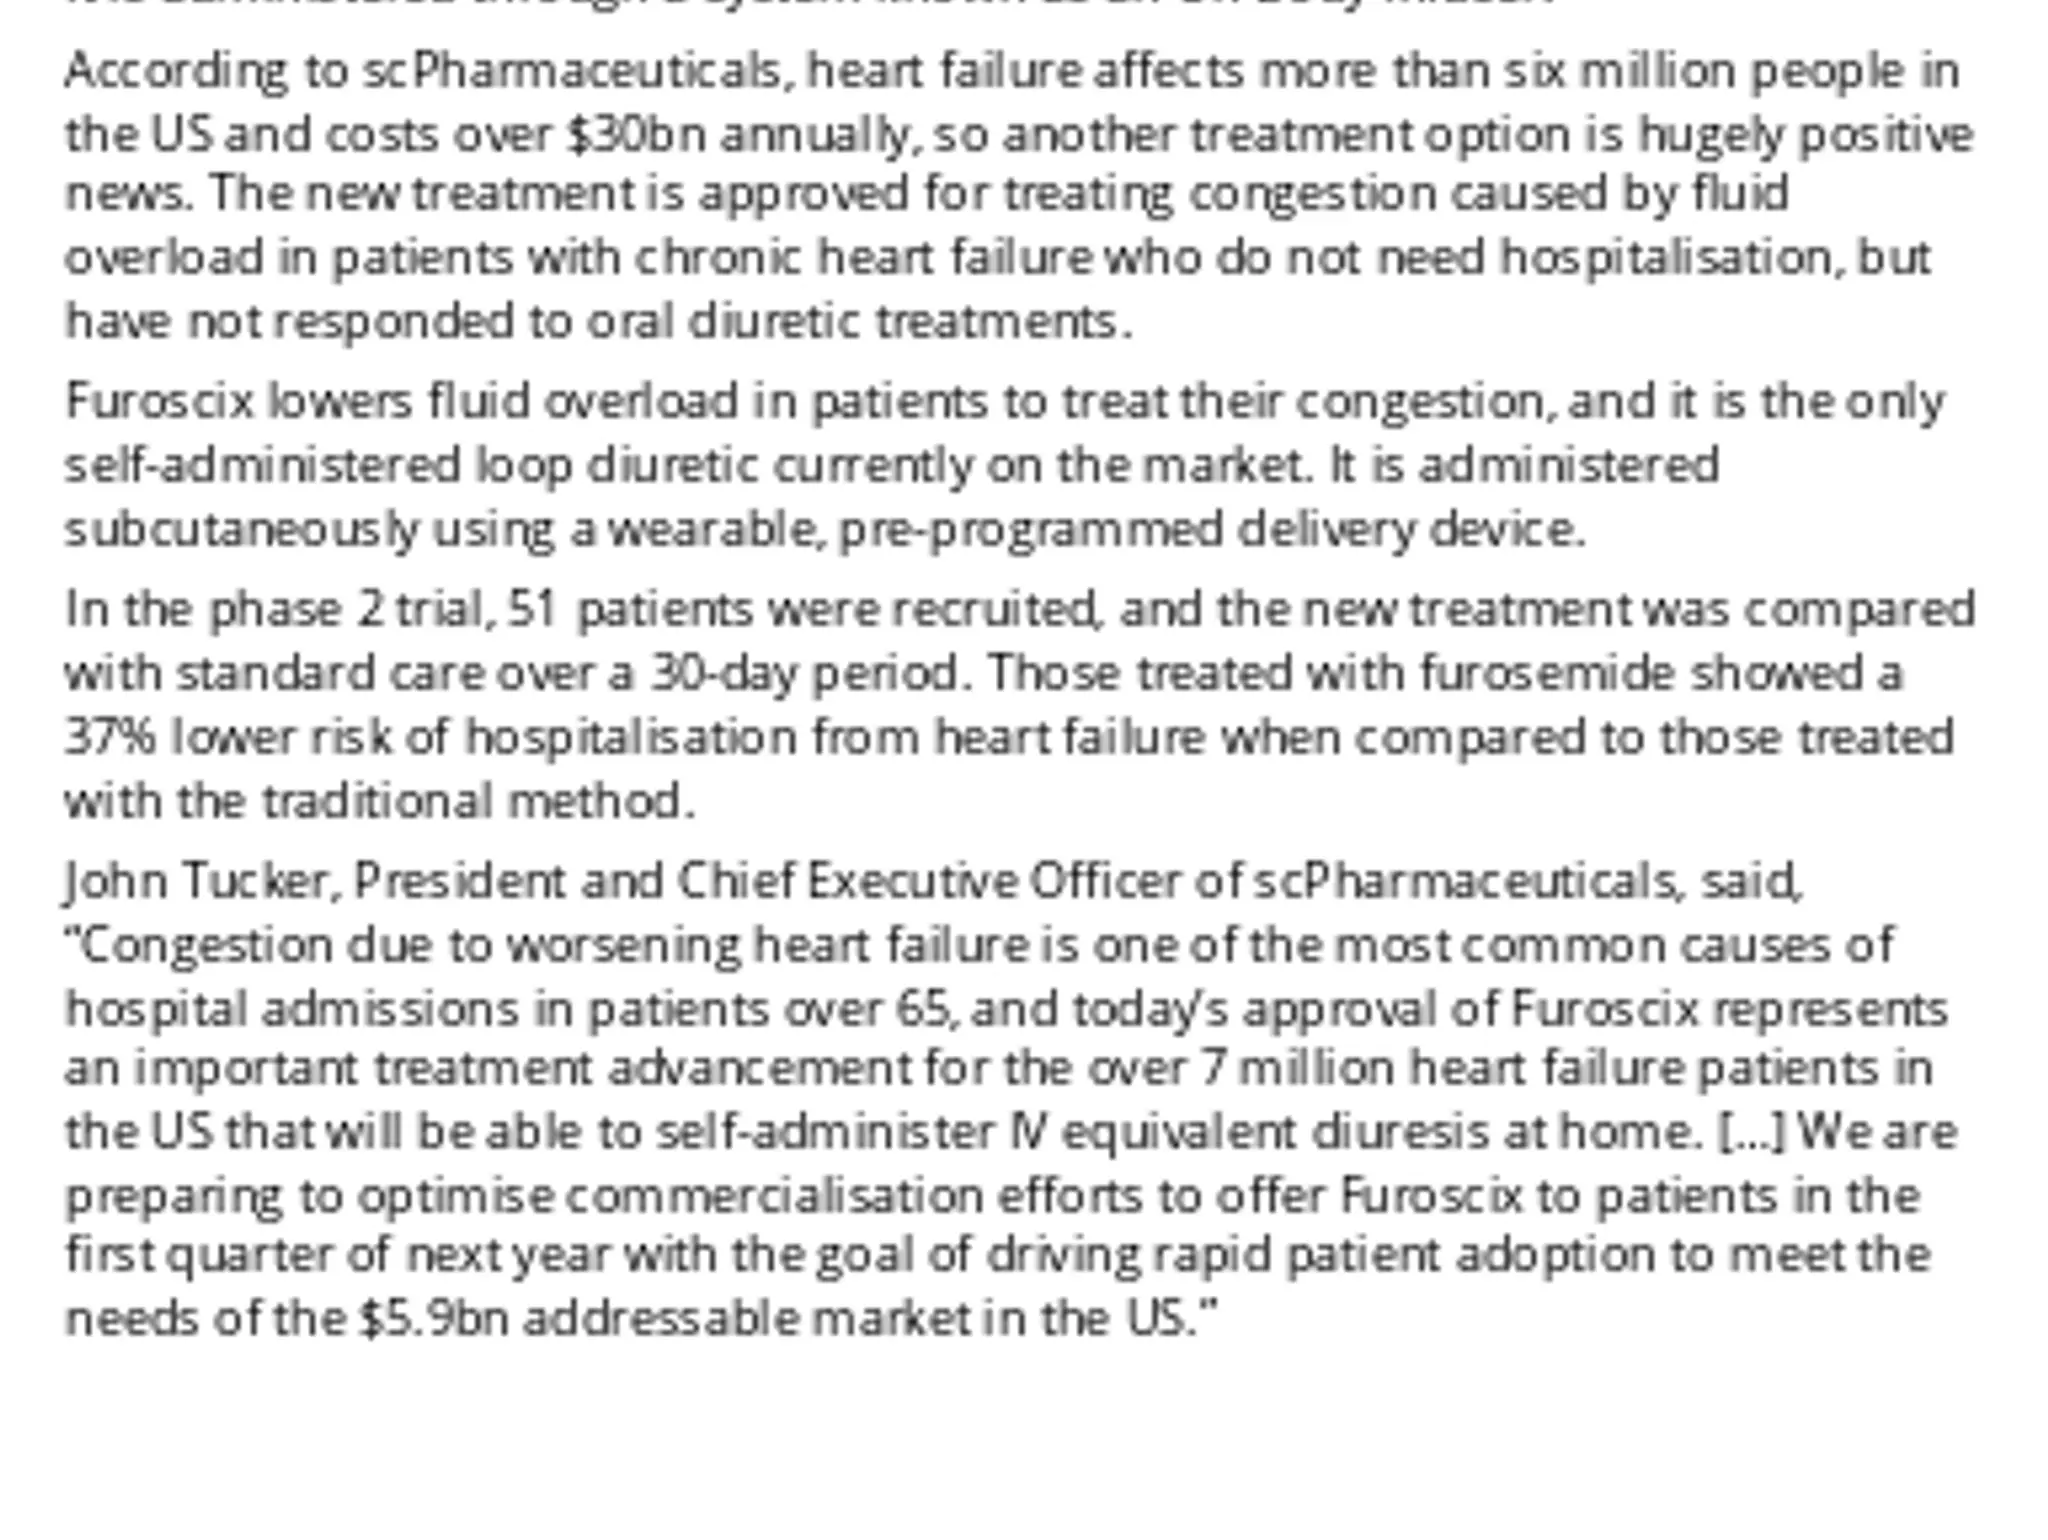 Furosemide approved by FDA for patients with chronic heart failure